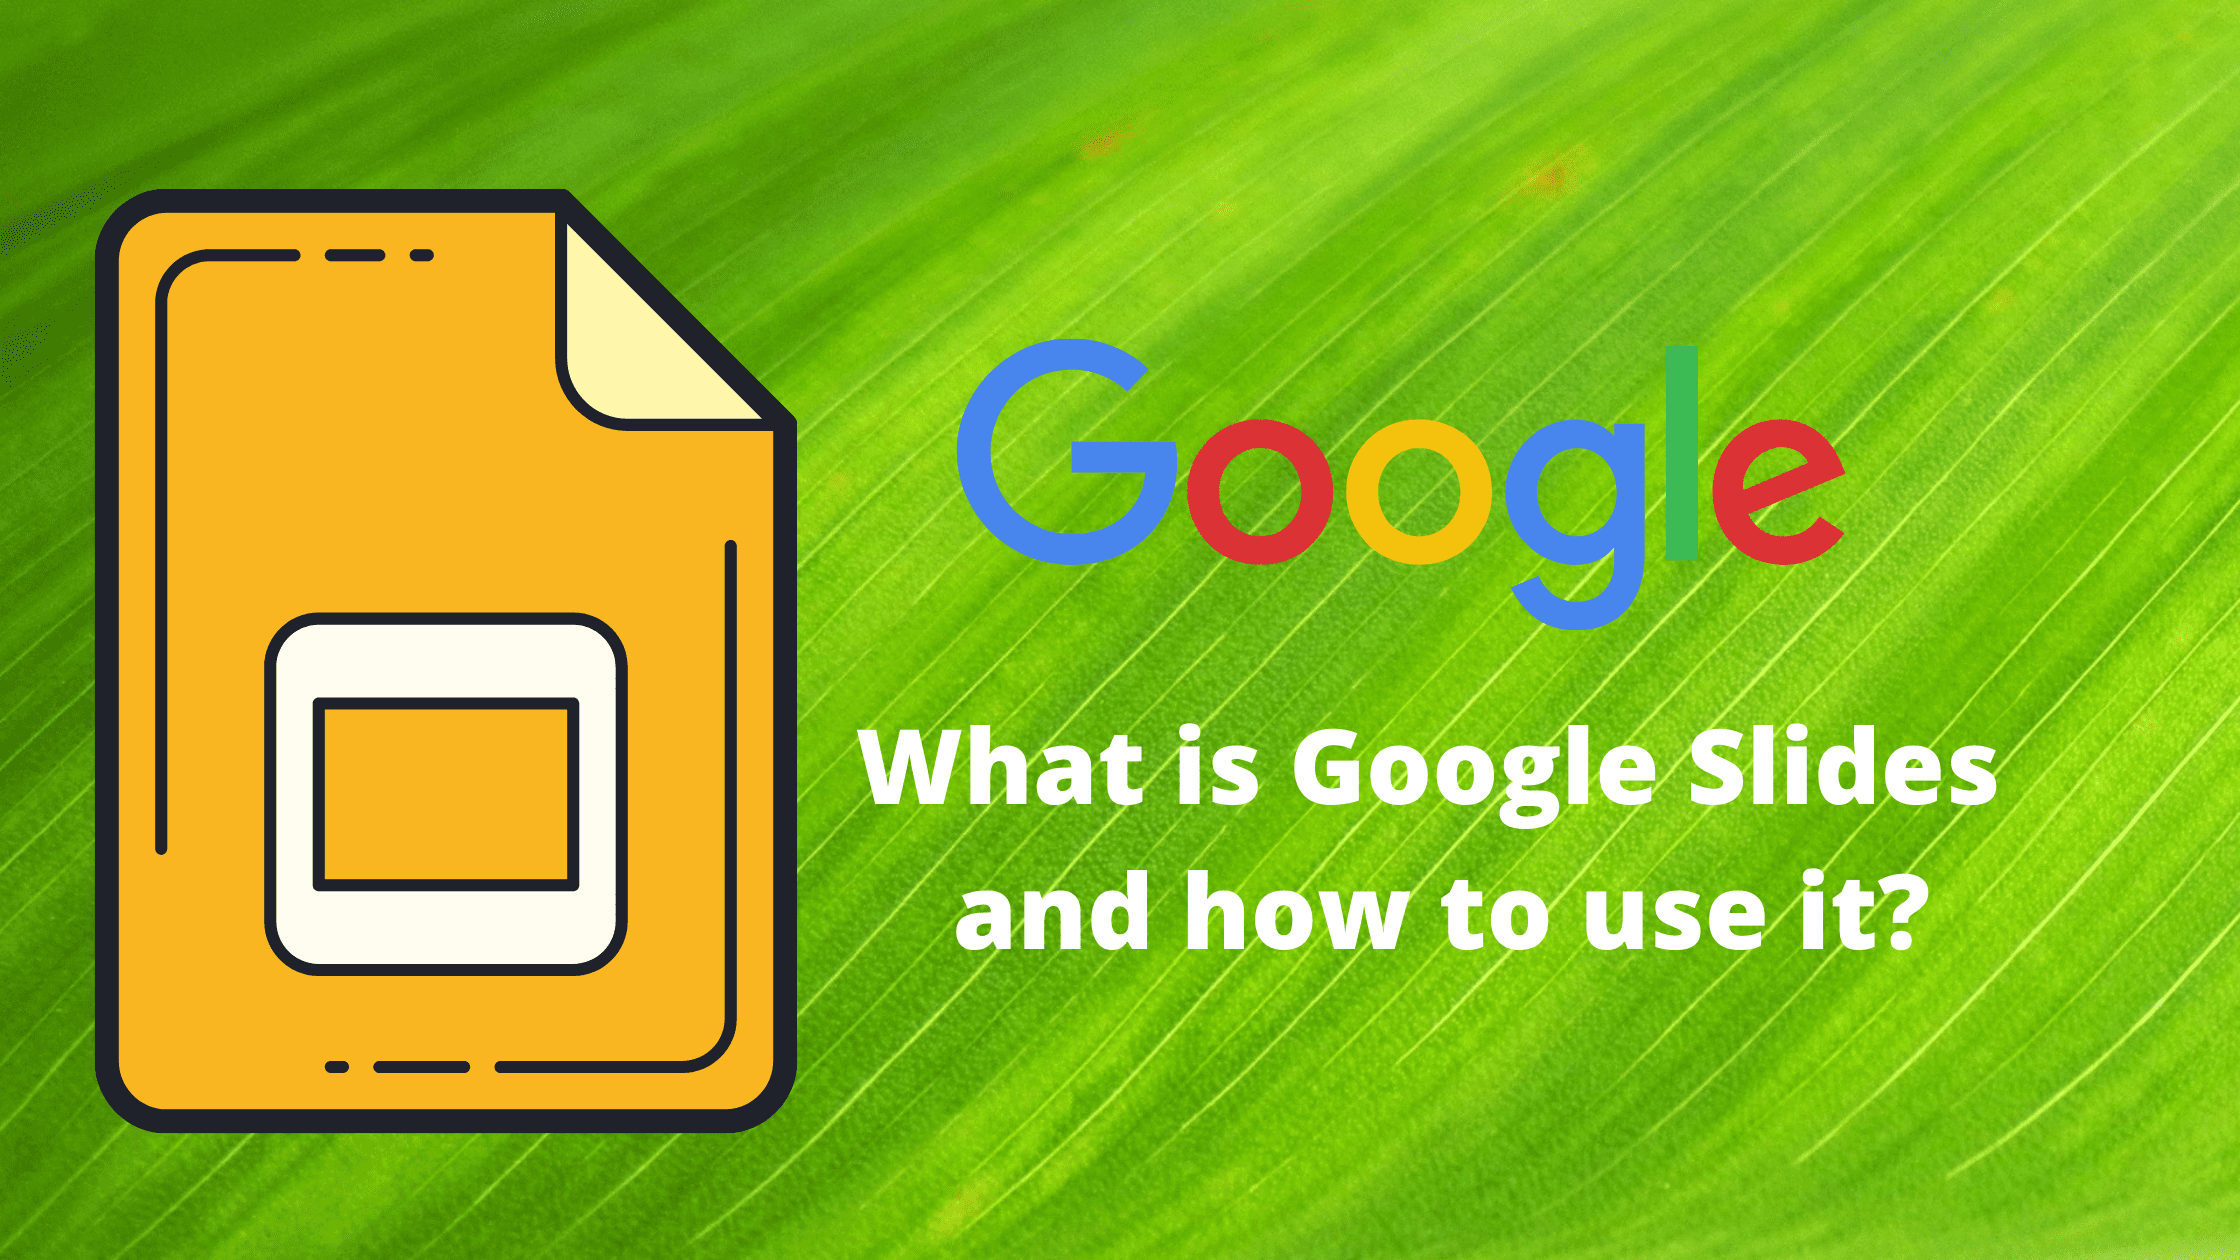 What is Google Slides and how to use it